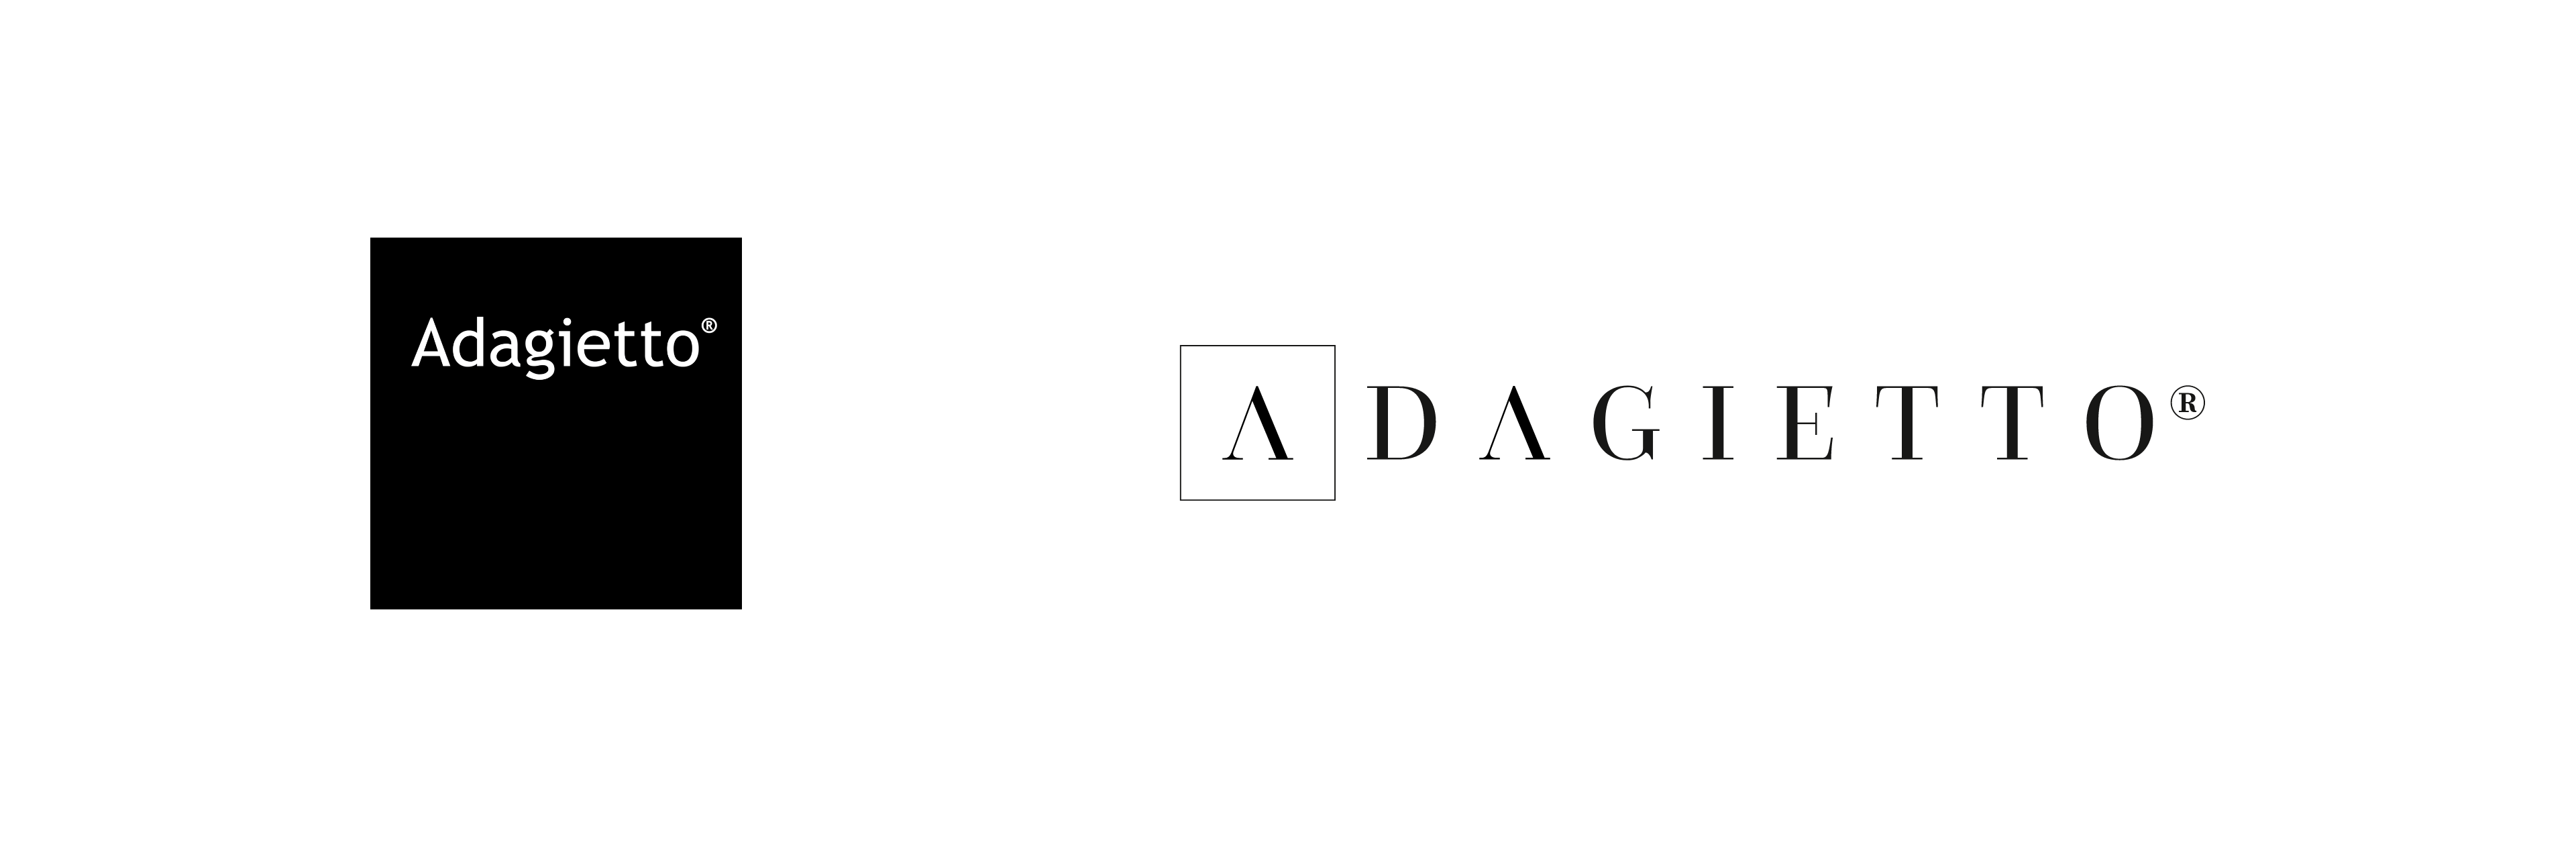 Adagietto_before_after_logo